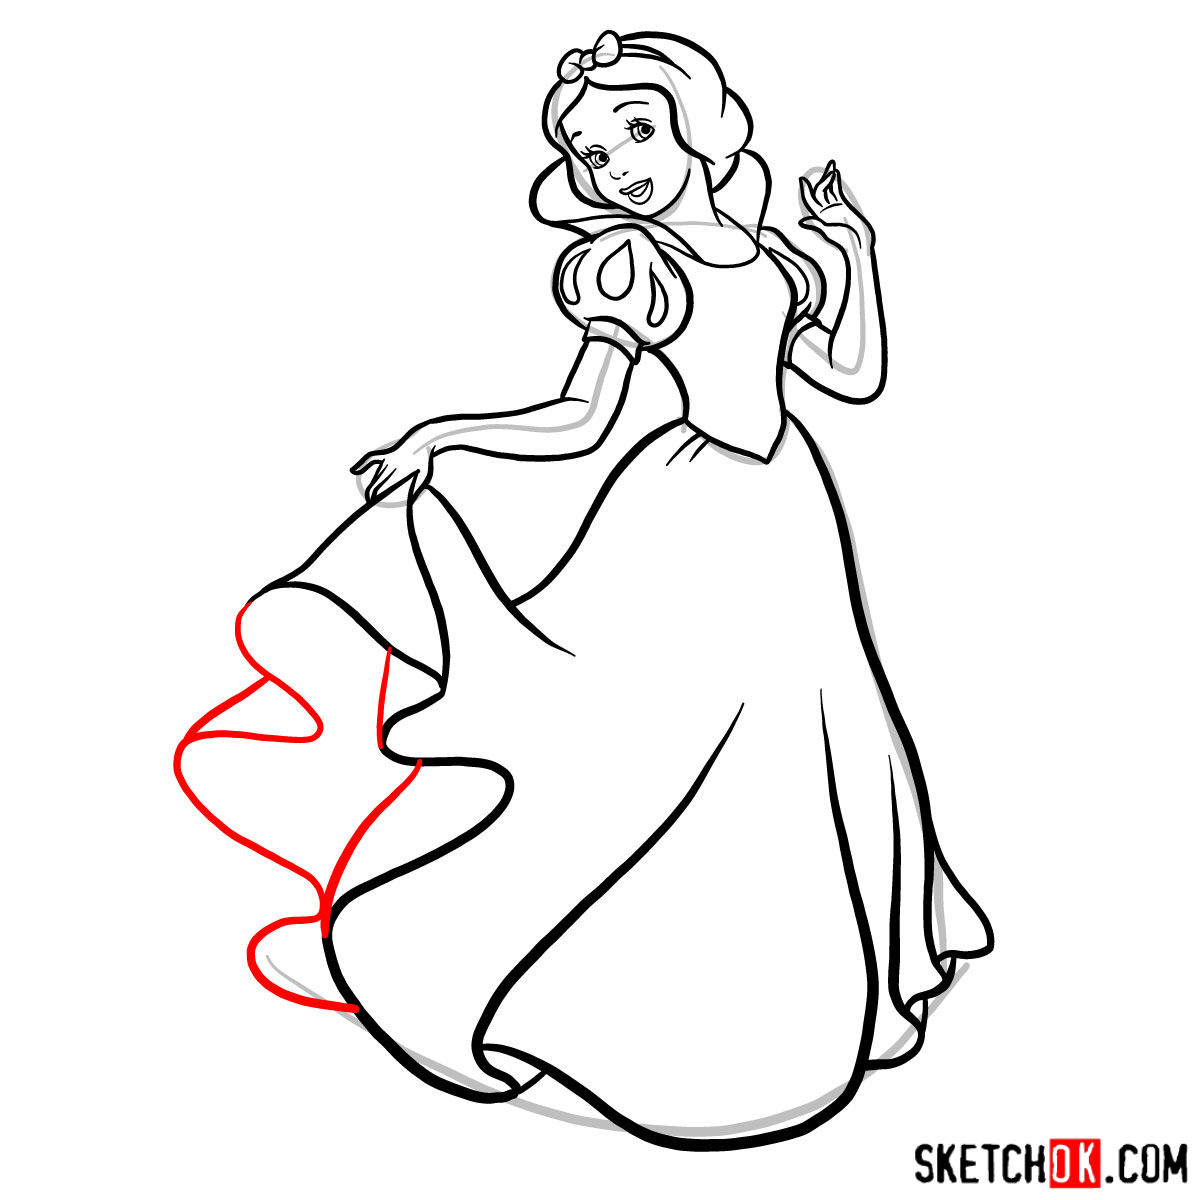 How to draw Snow White - step 12